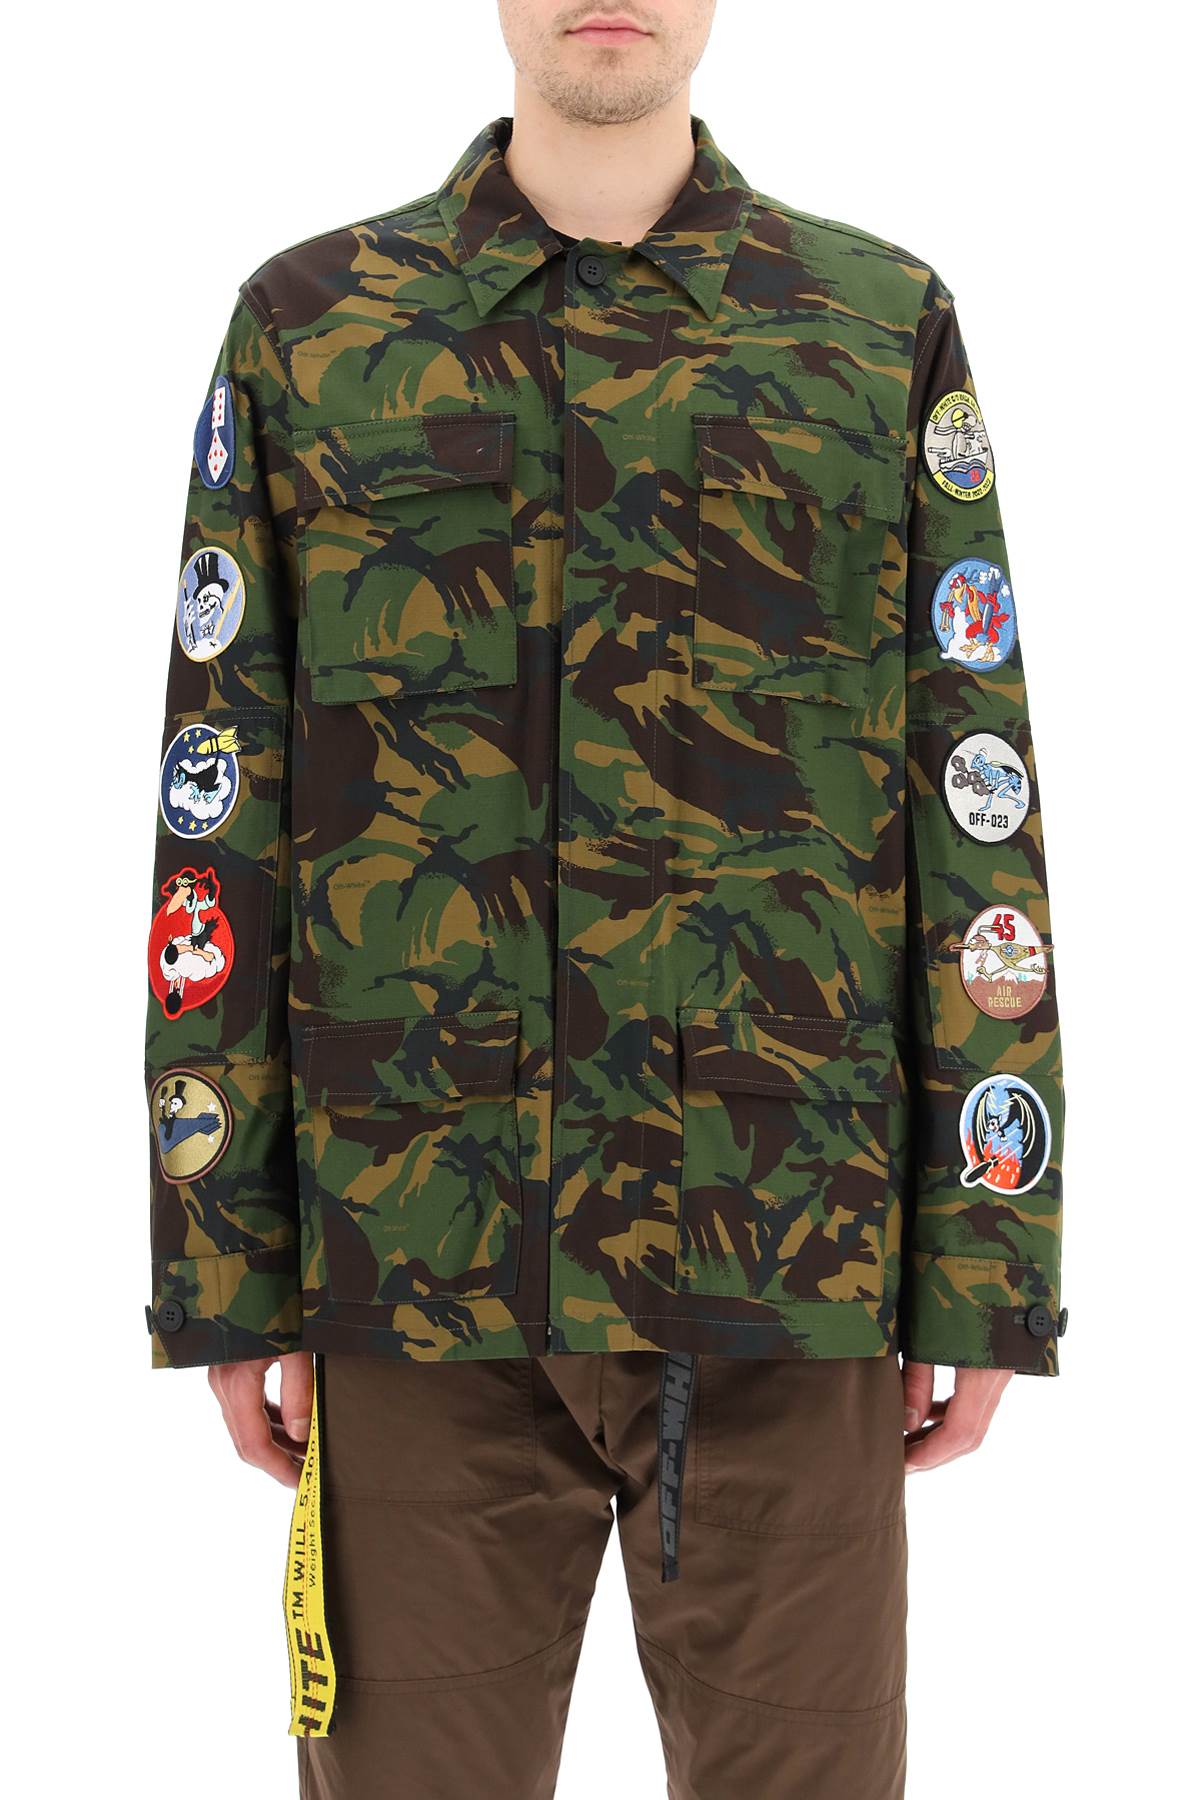 Off-white safari jacket with decorative patches